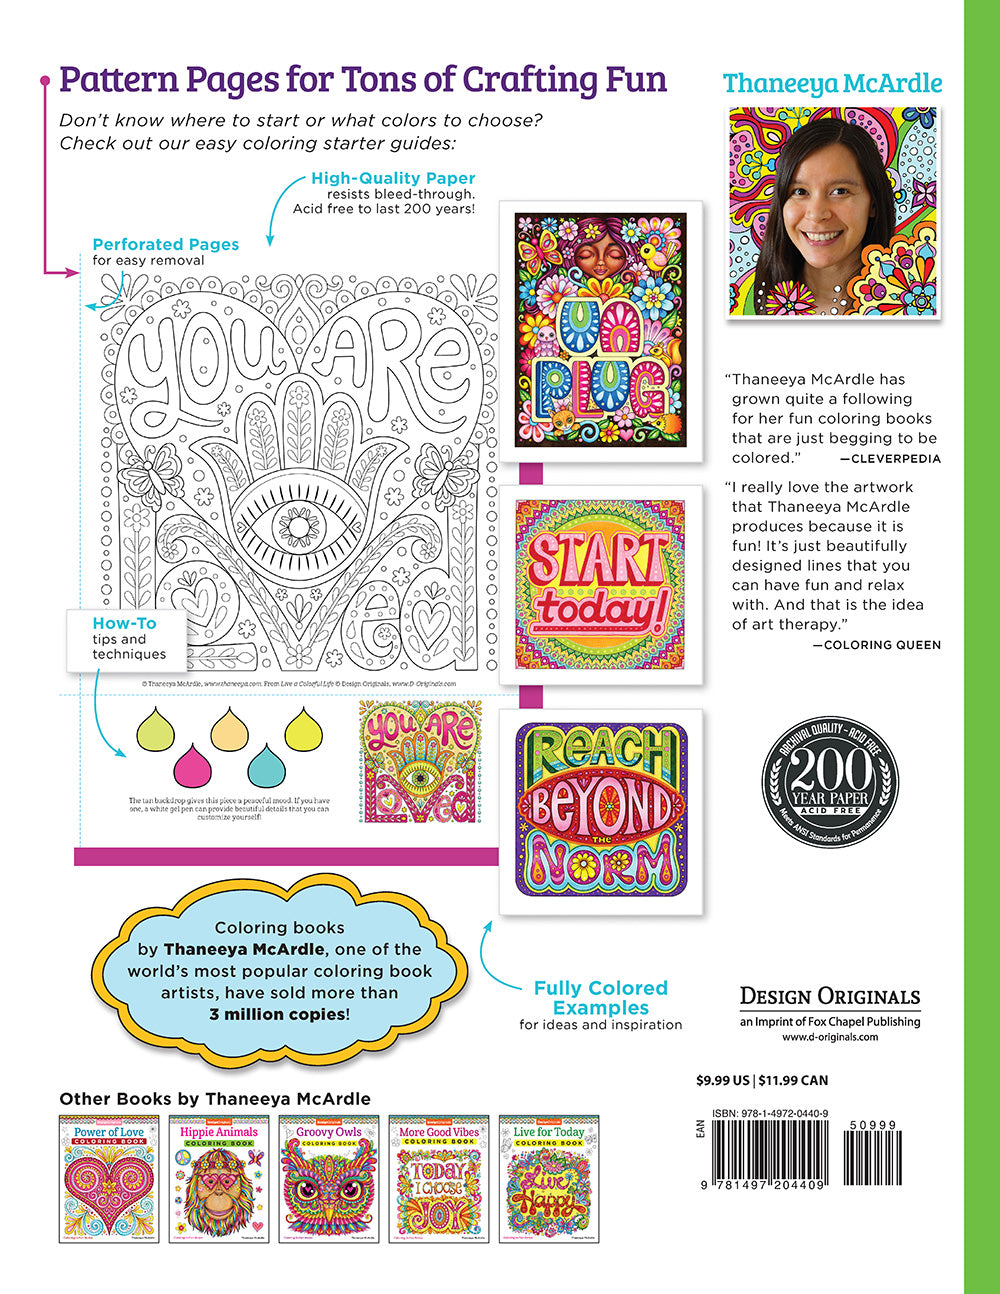 Live a Colorful Life Coloring Book